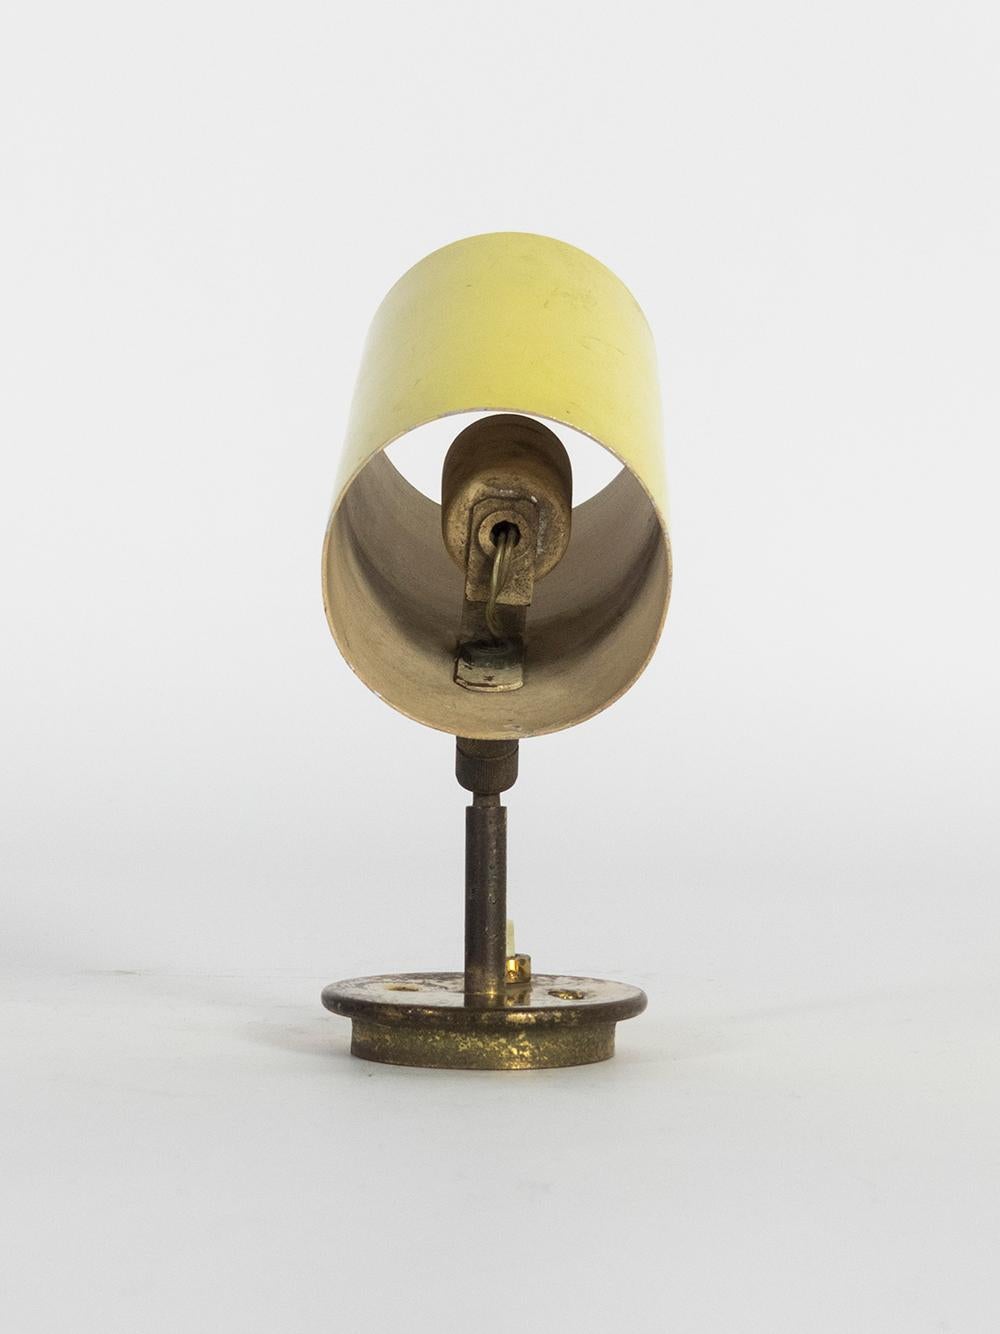 Polished Gino Sarfatti Yellow Mod. 33 Midcentury Directable Wall Light for Arteluce 1950s For Sale